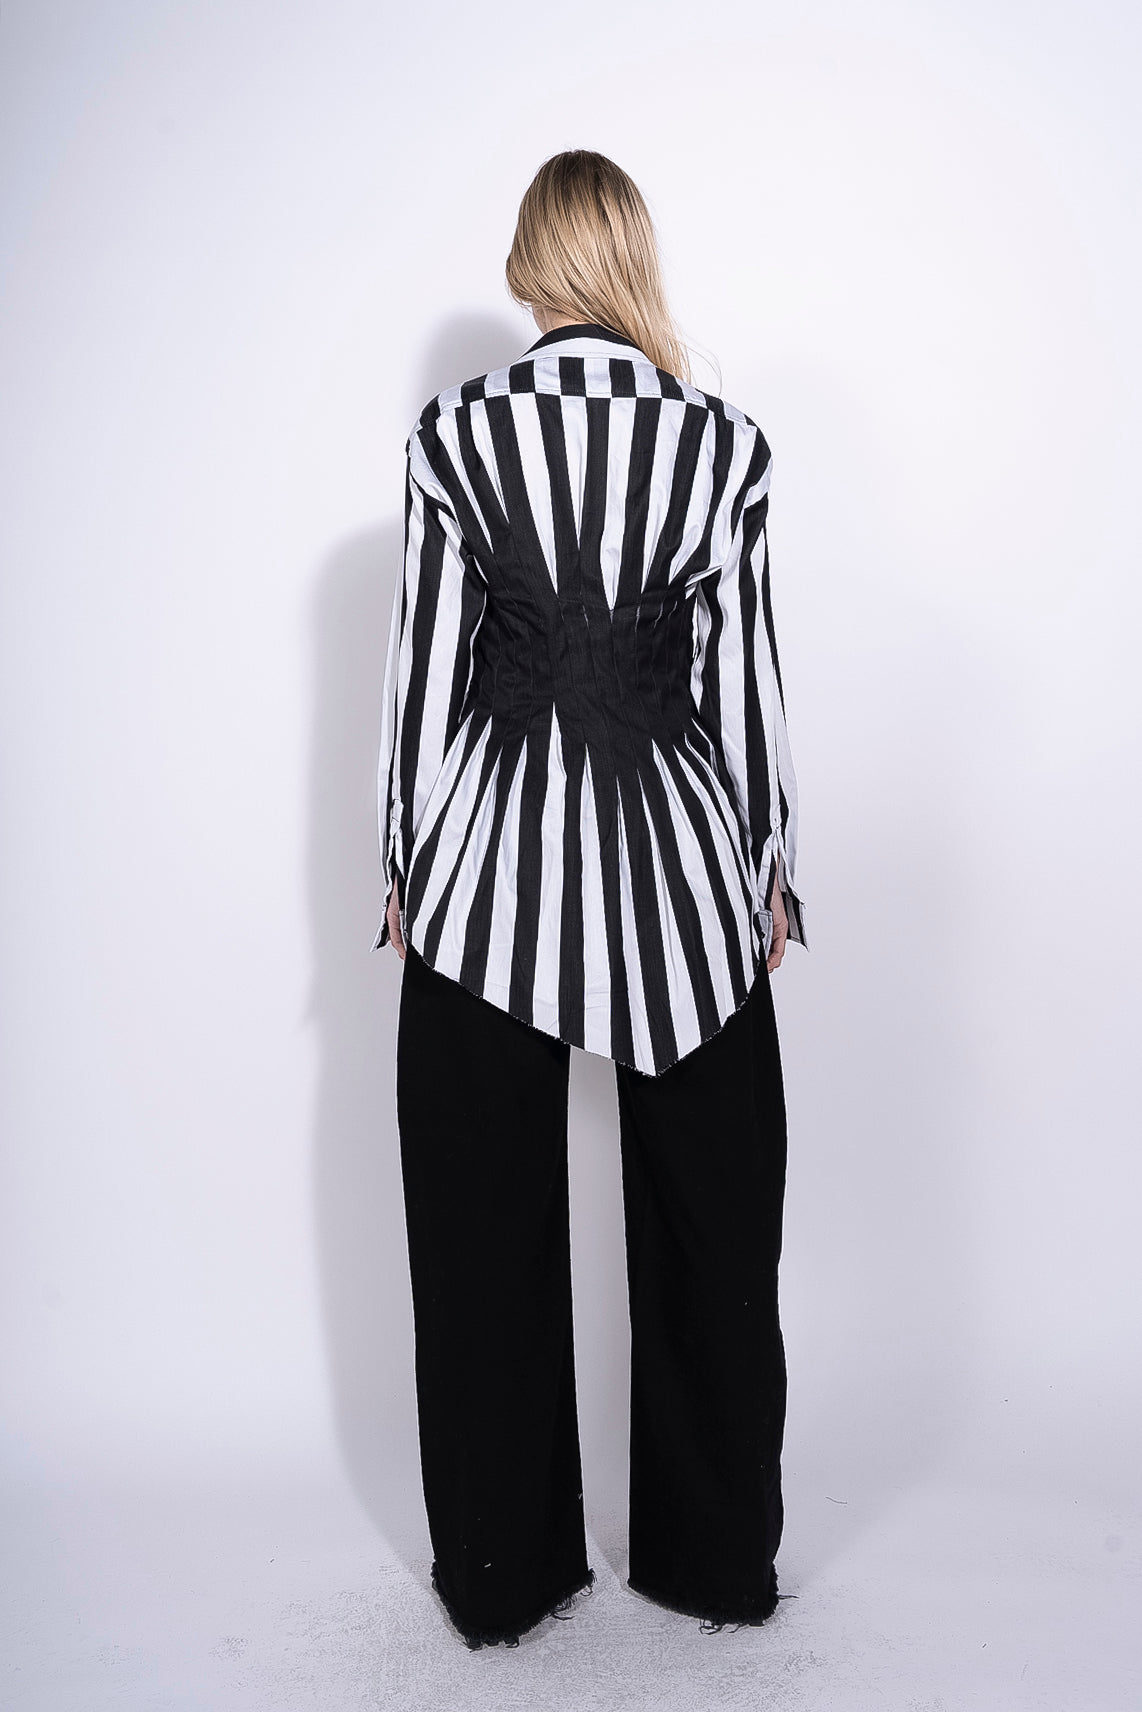 BLACK AND WHITE CINCHED SHIRT marques almeida